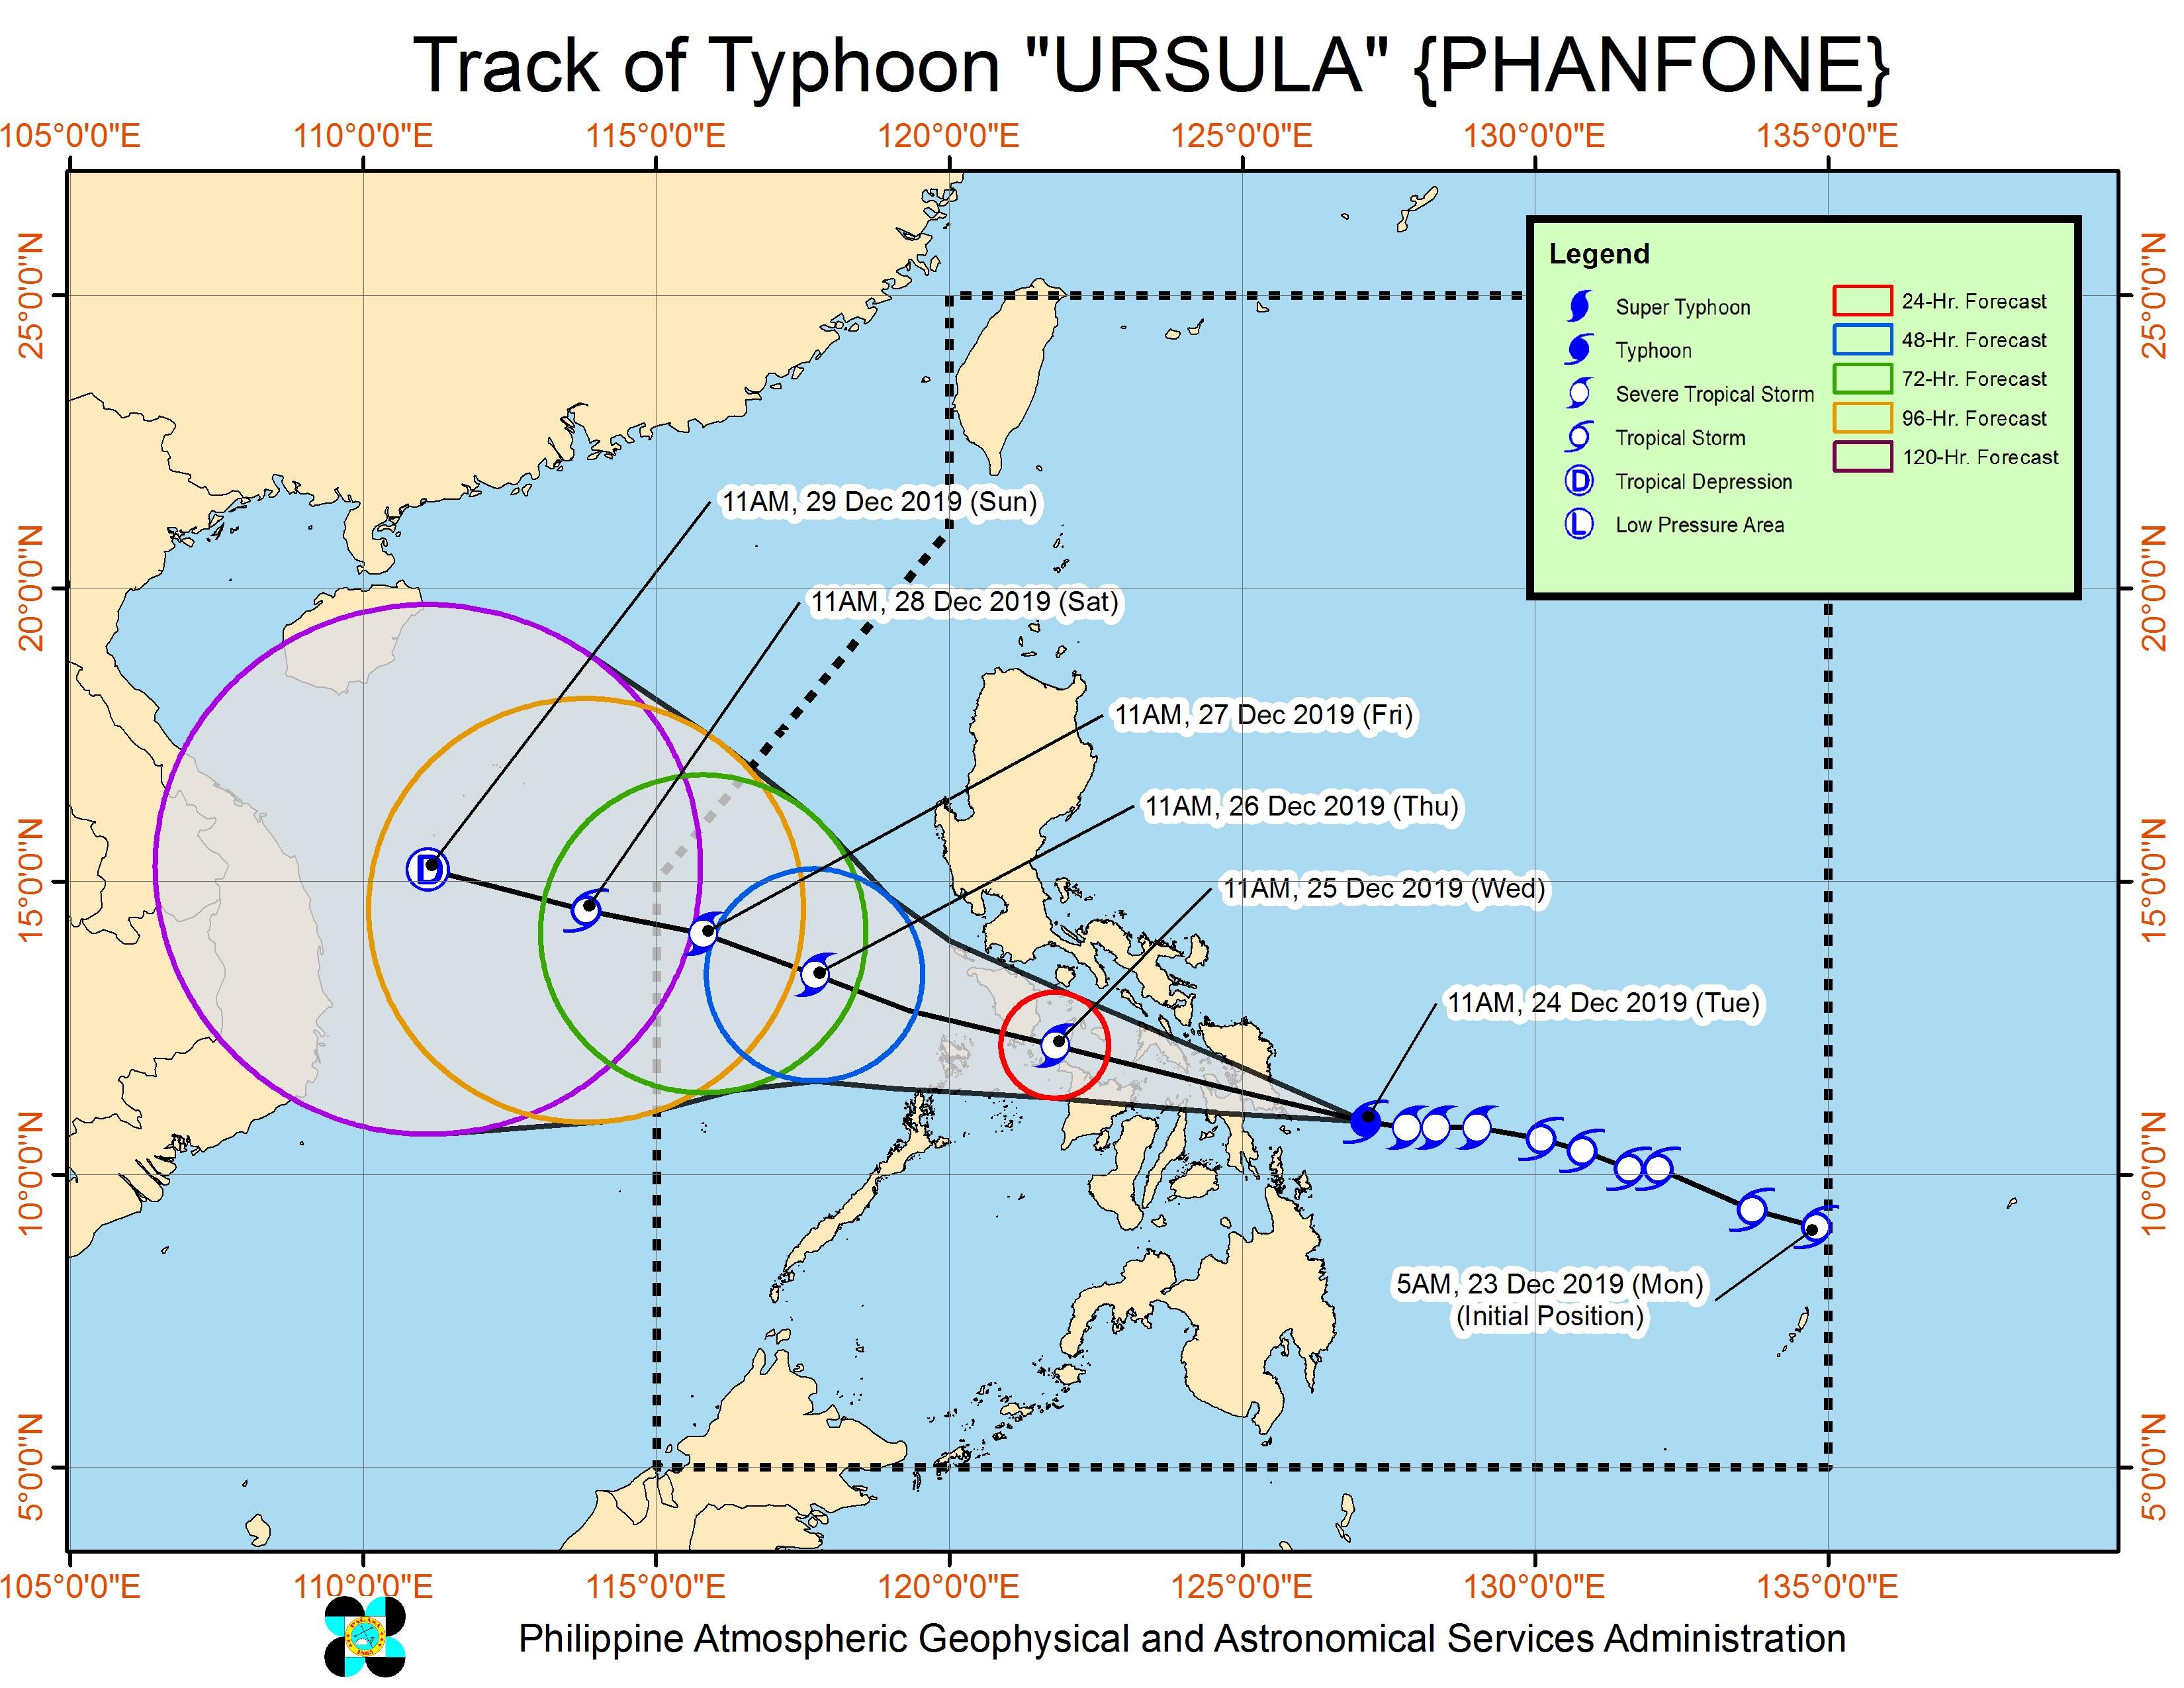 Forecast track of Typhoon Ursula (Phanfone) as of December 24, 2019, 2 pm. Image from PAGASA 